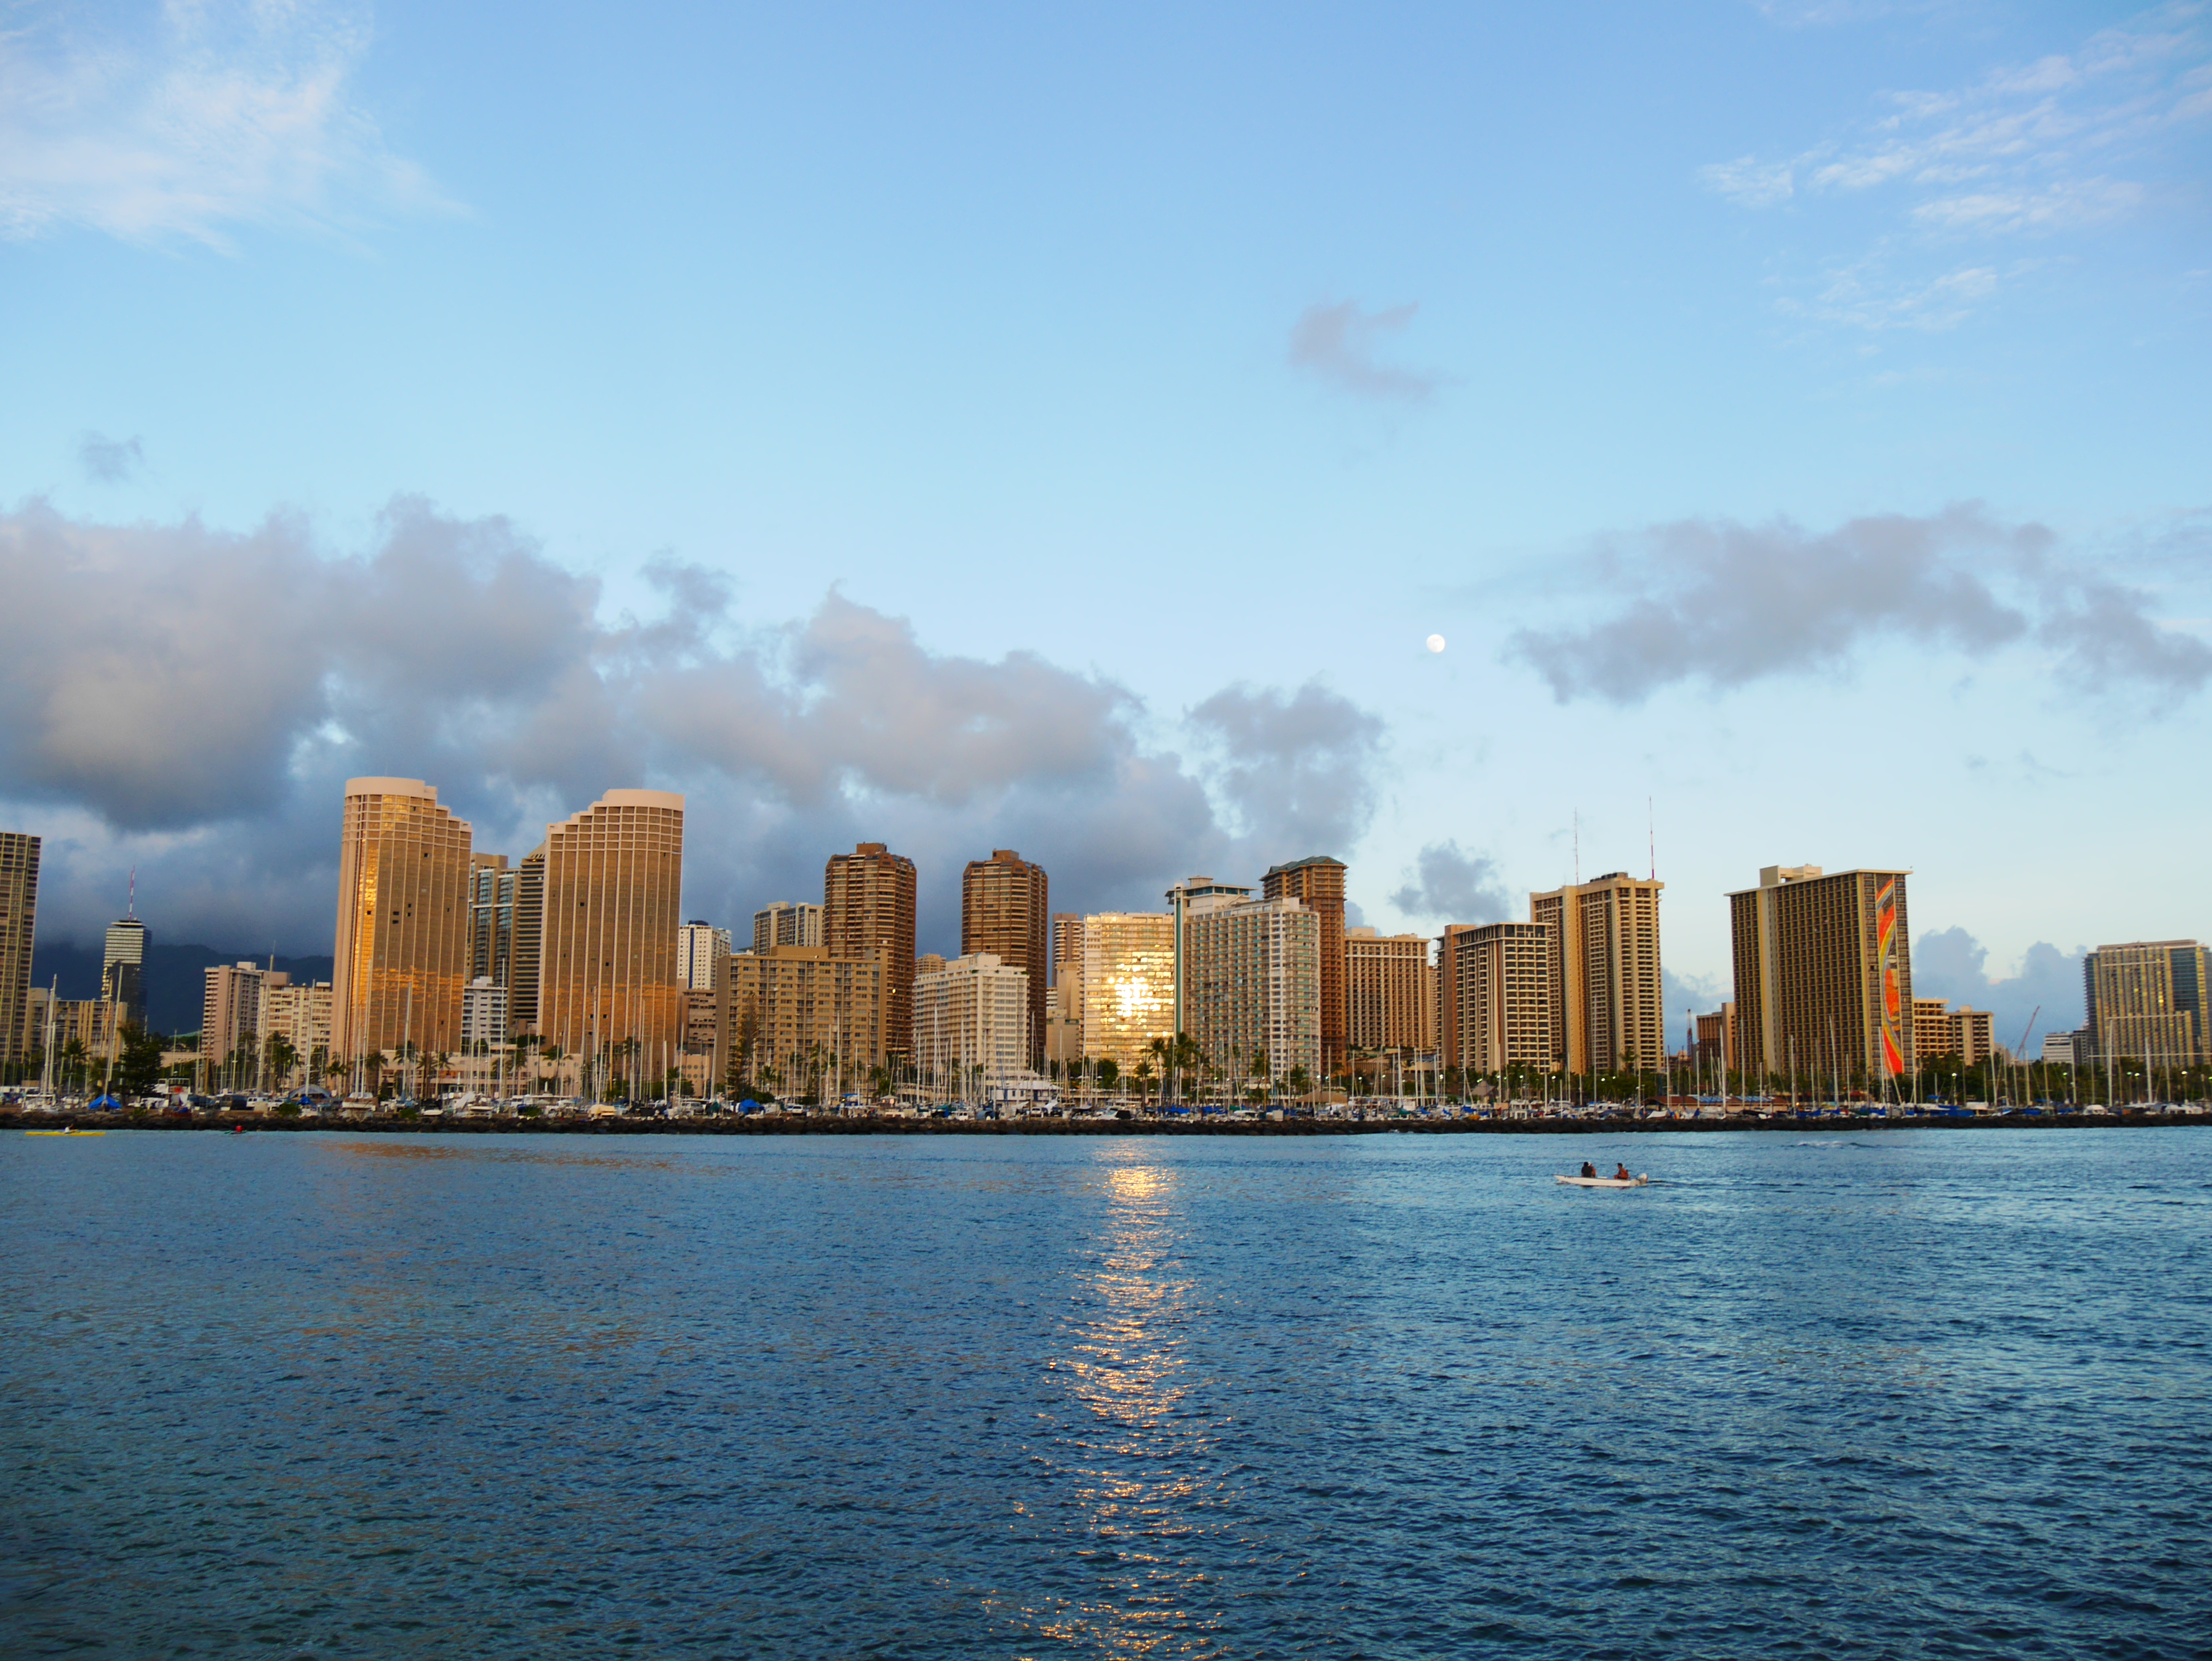 Sunset over Honolulu from Magic Island, Oahu on a segway history and cultural tour